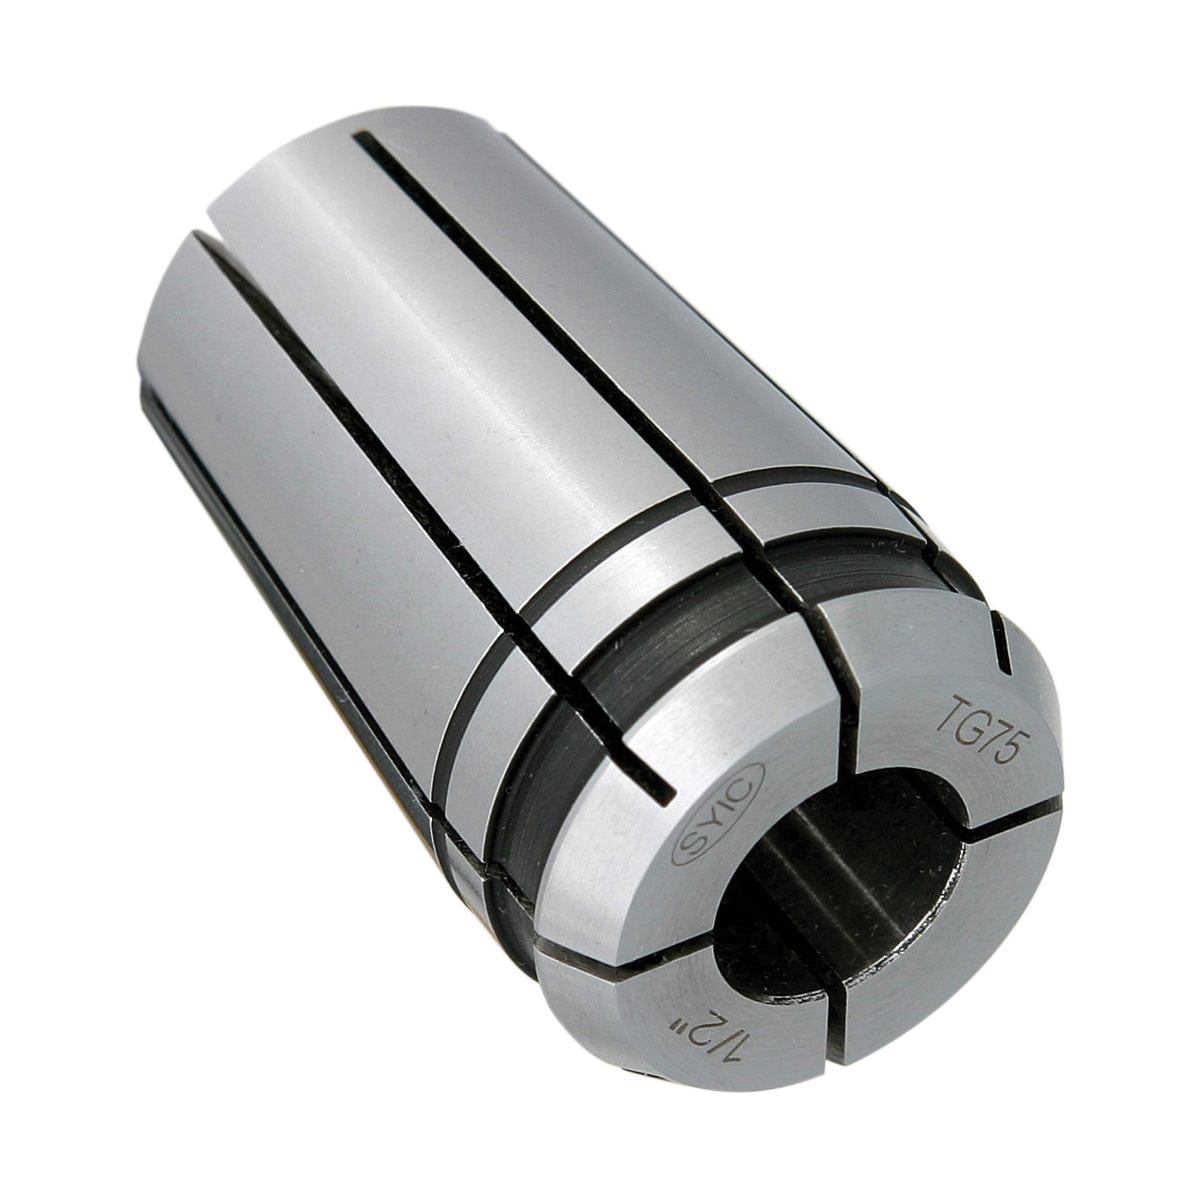 TG75 7/64" COLLET